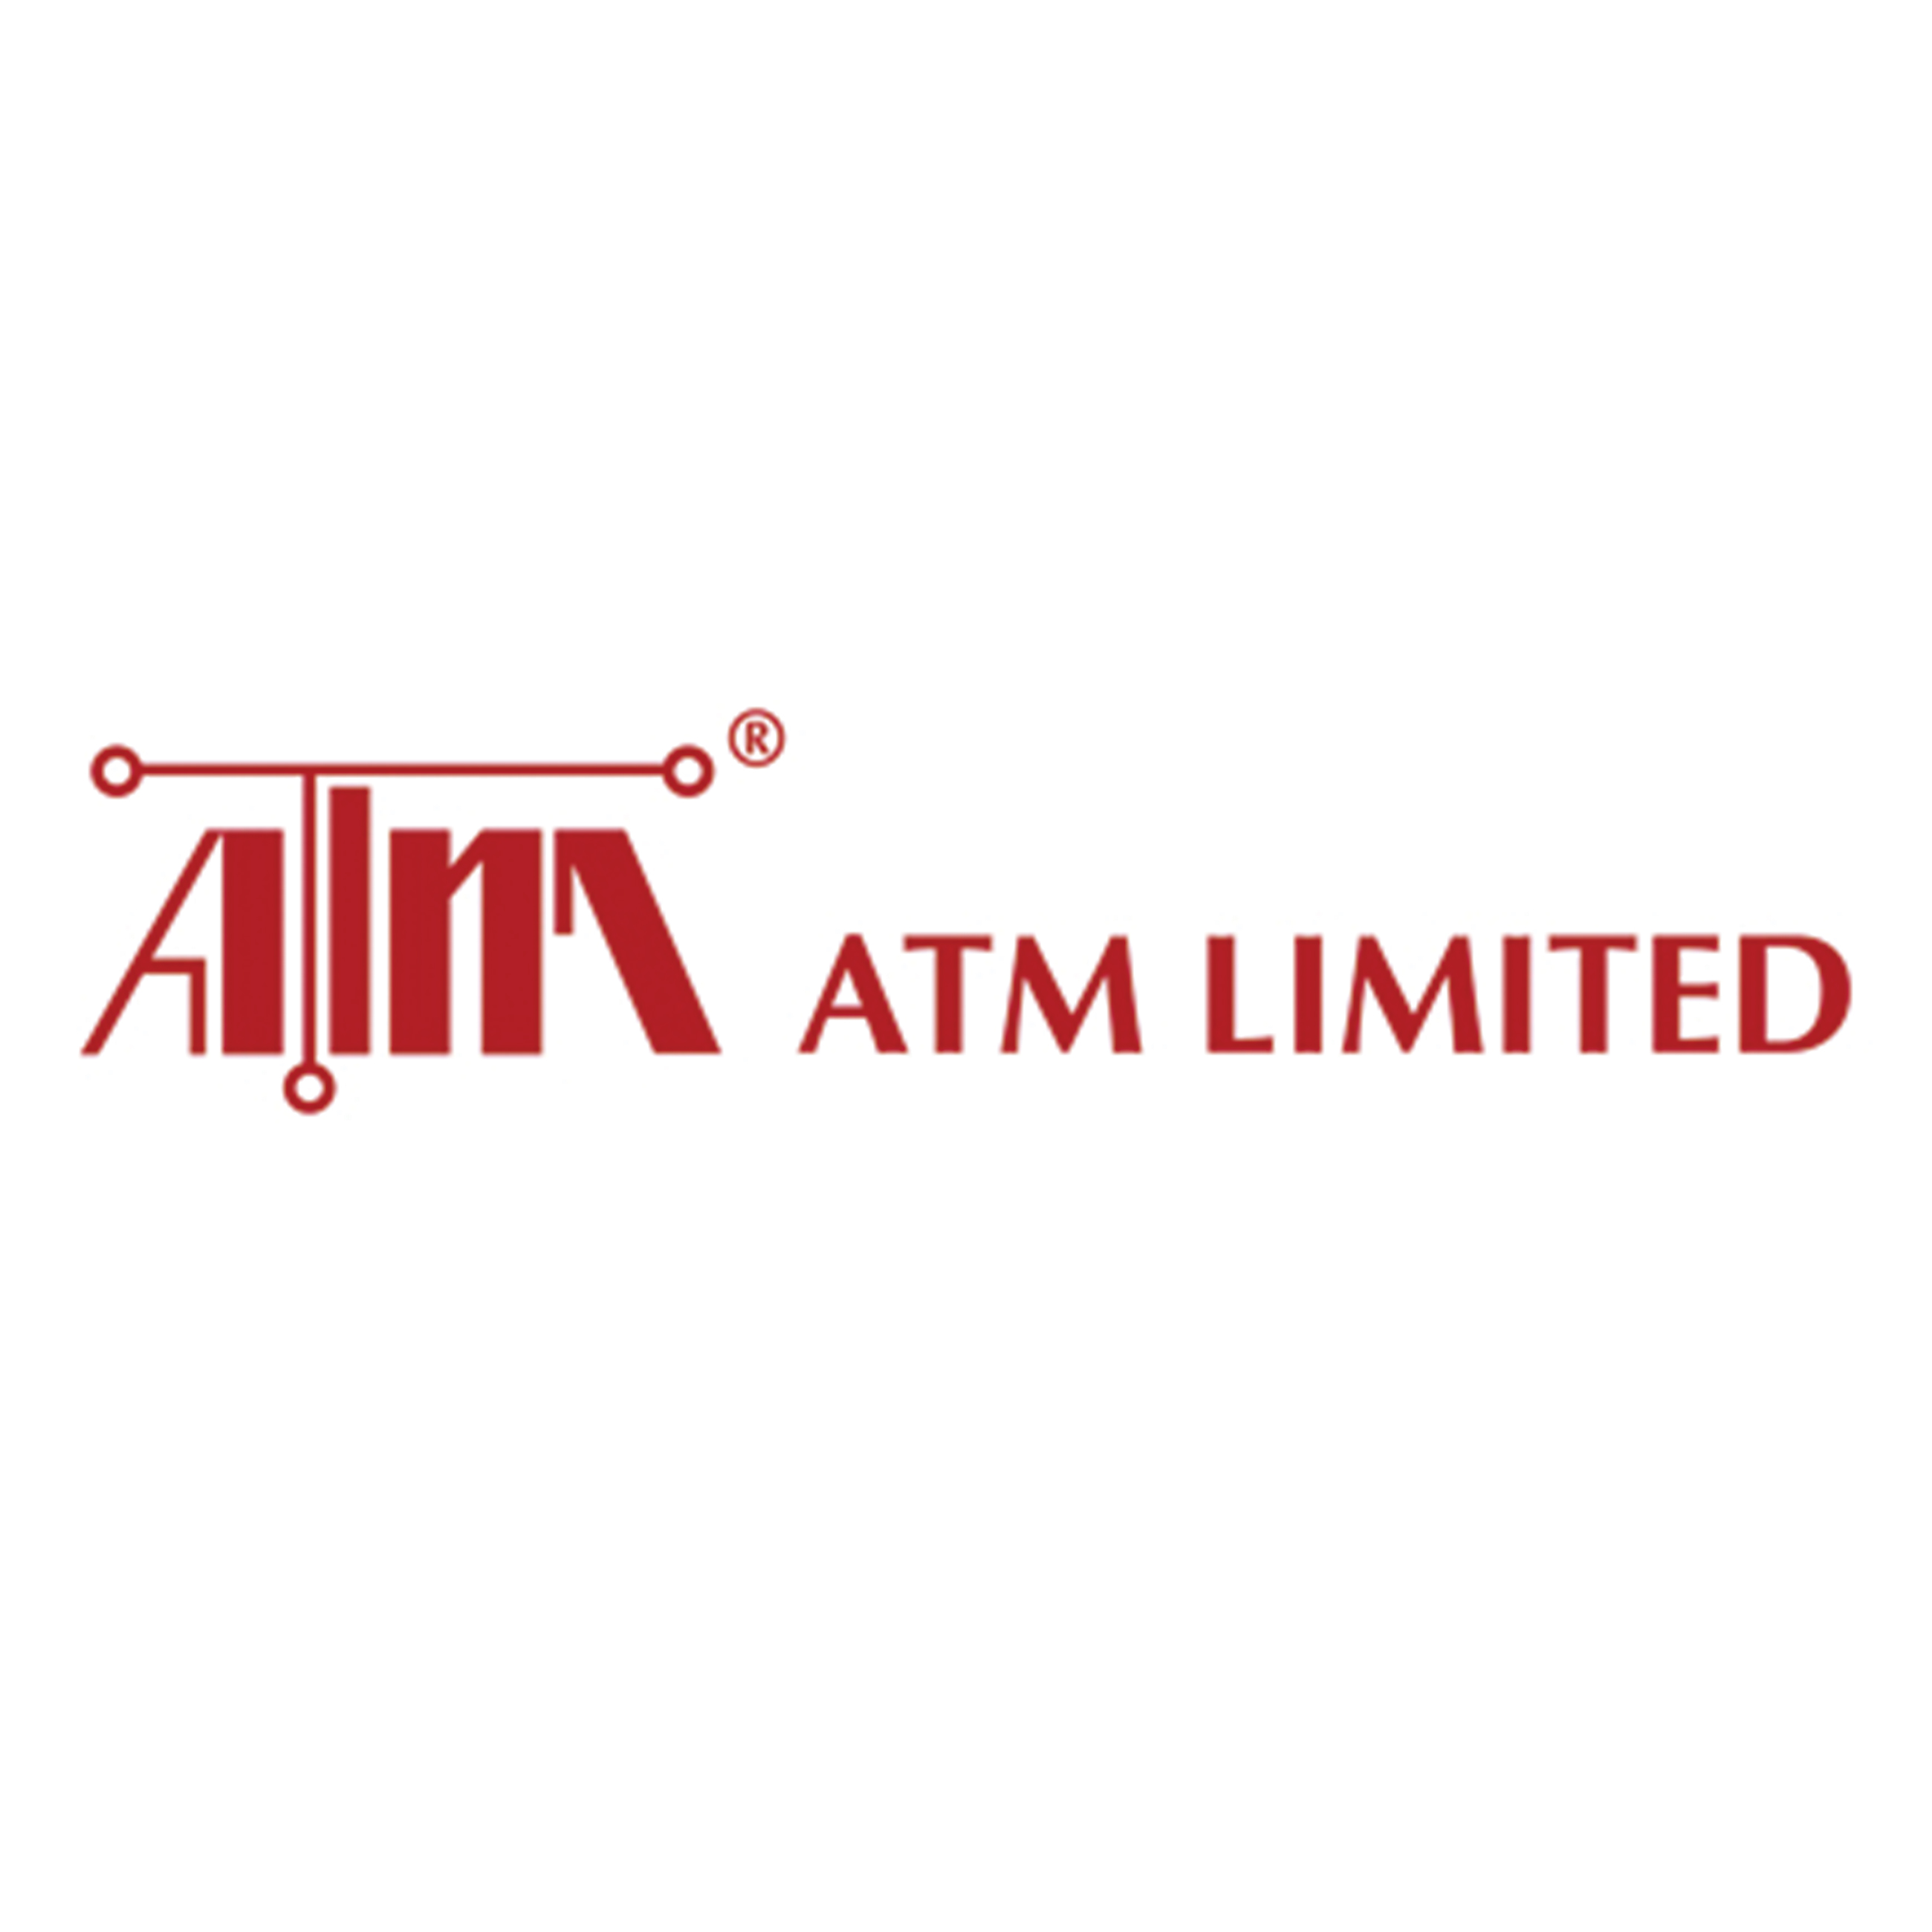 ATM LIMITED